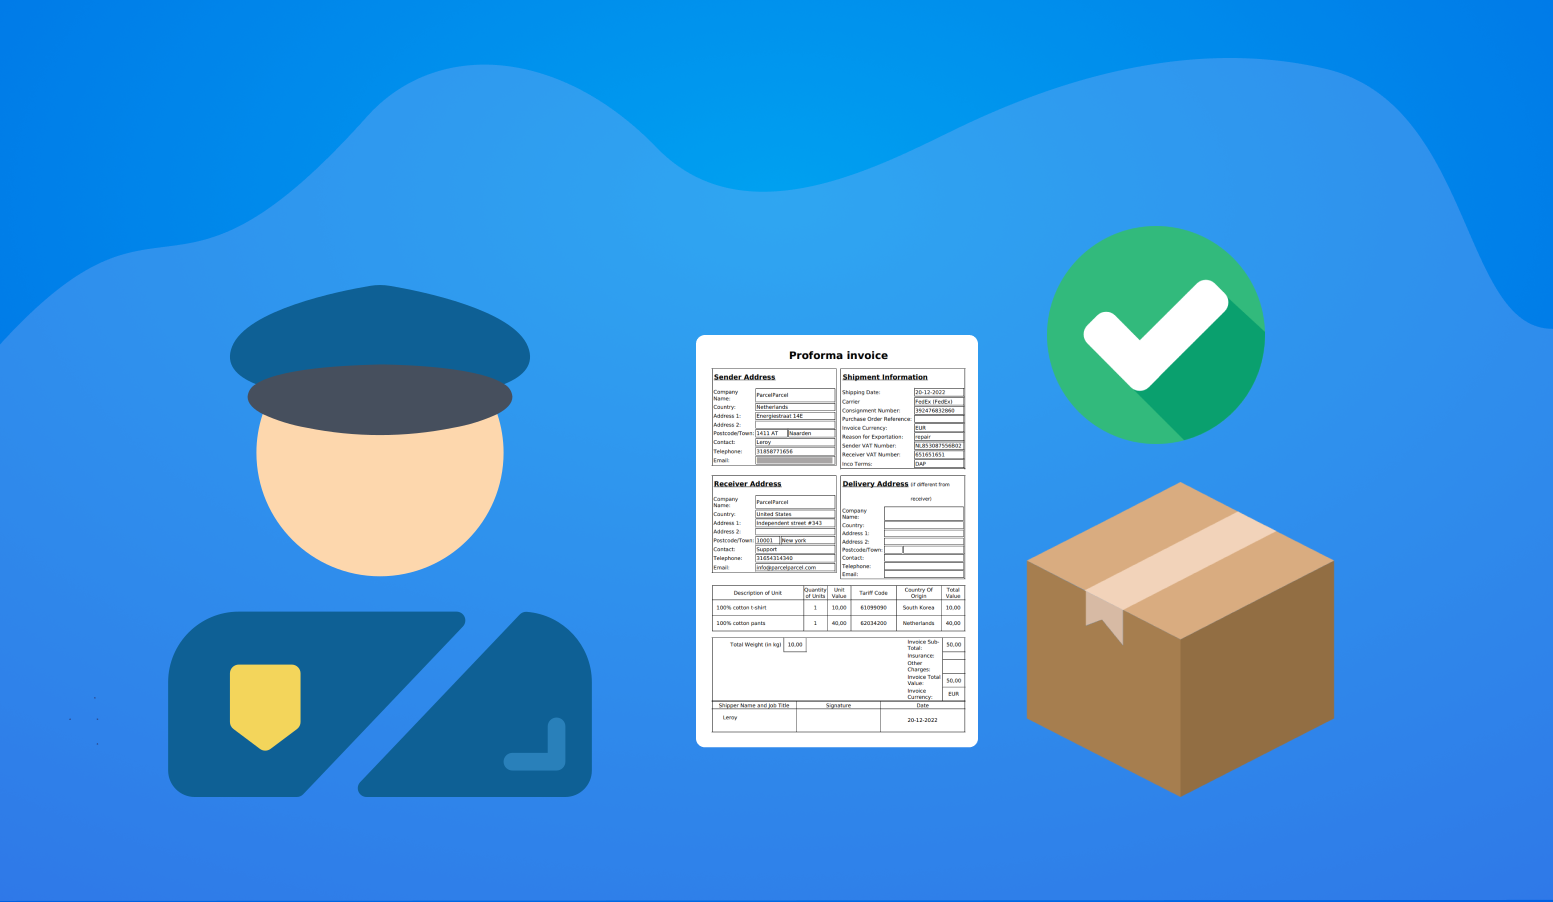 Illustration showing Electronic Trade Document (ETD) for faster customs clearance